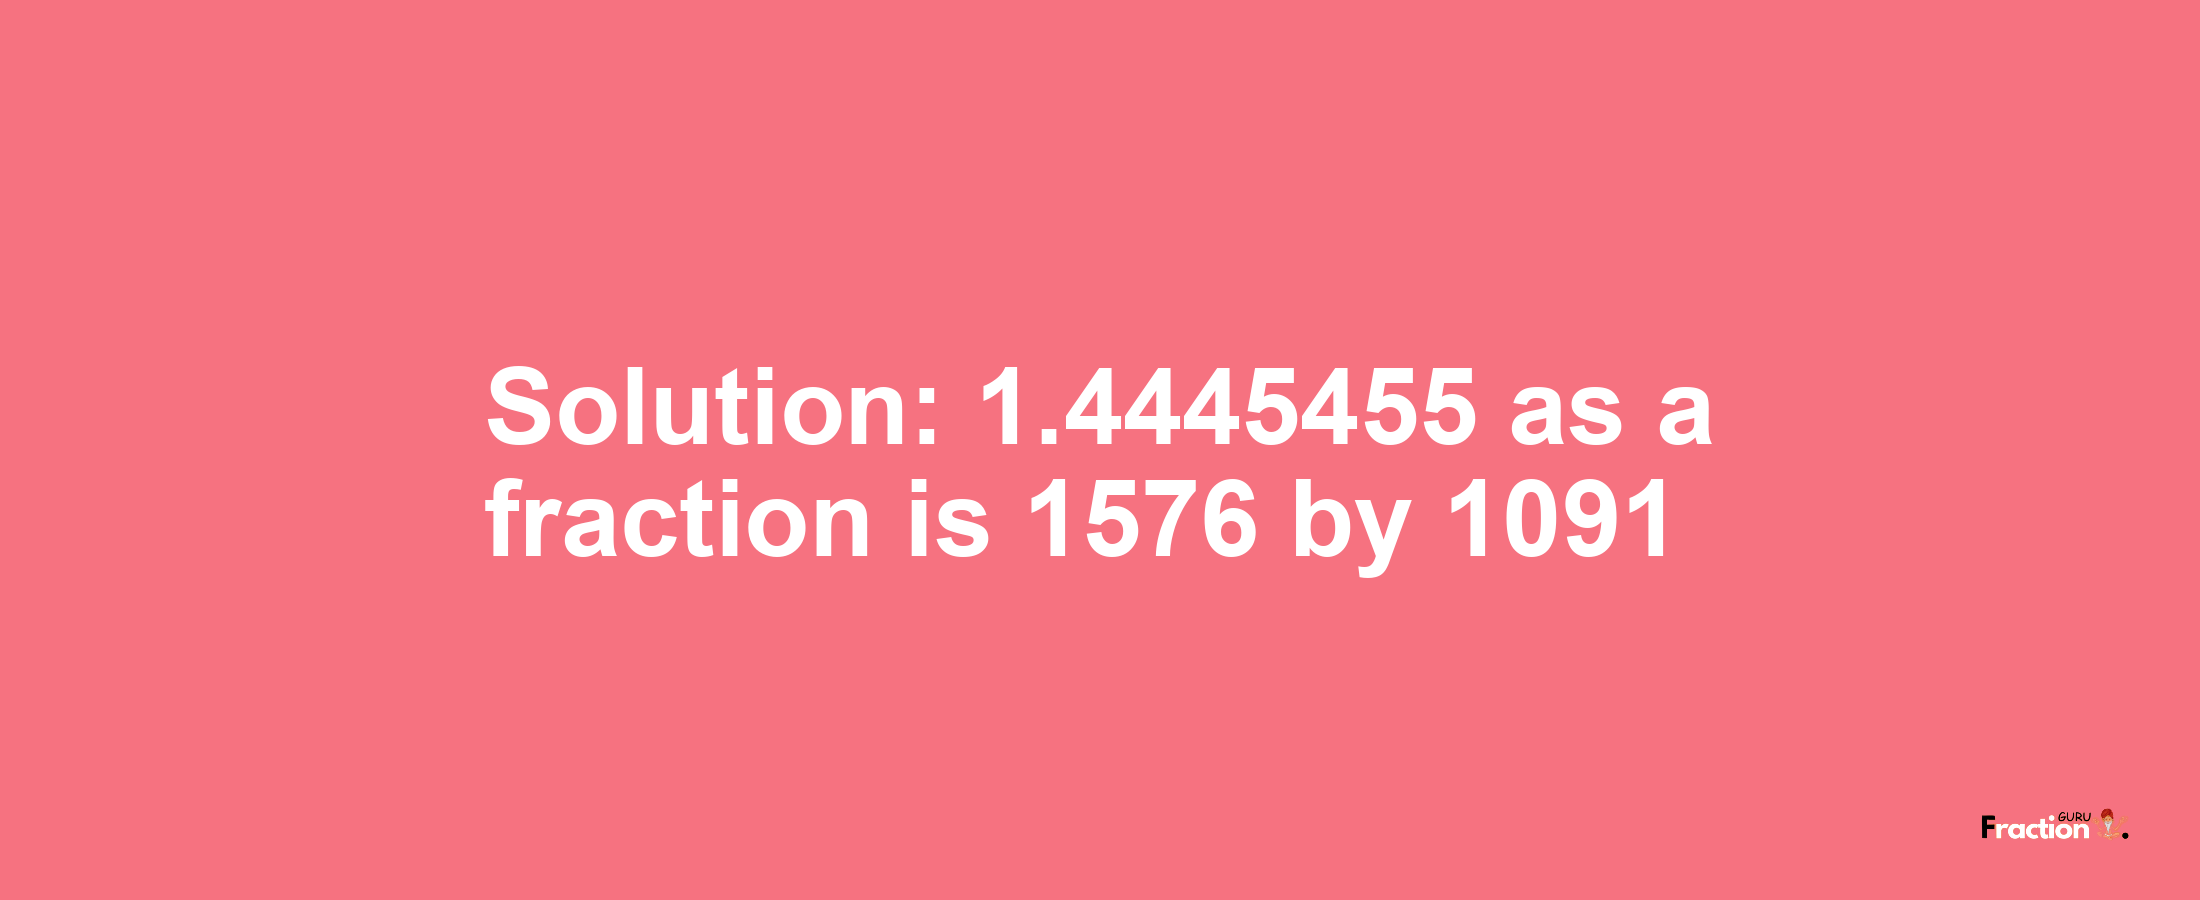 Solution:1.4445455 as a fraction is 1576/1091